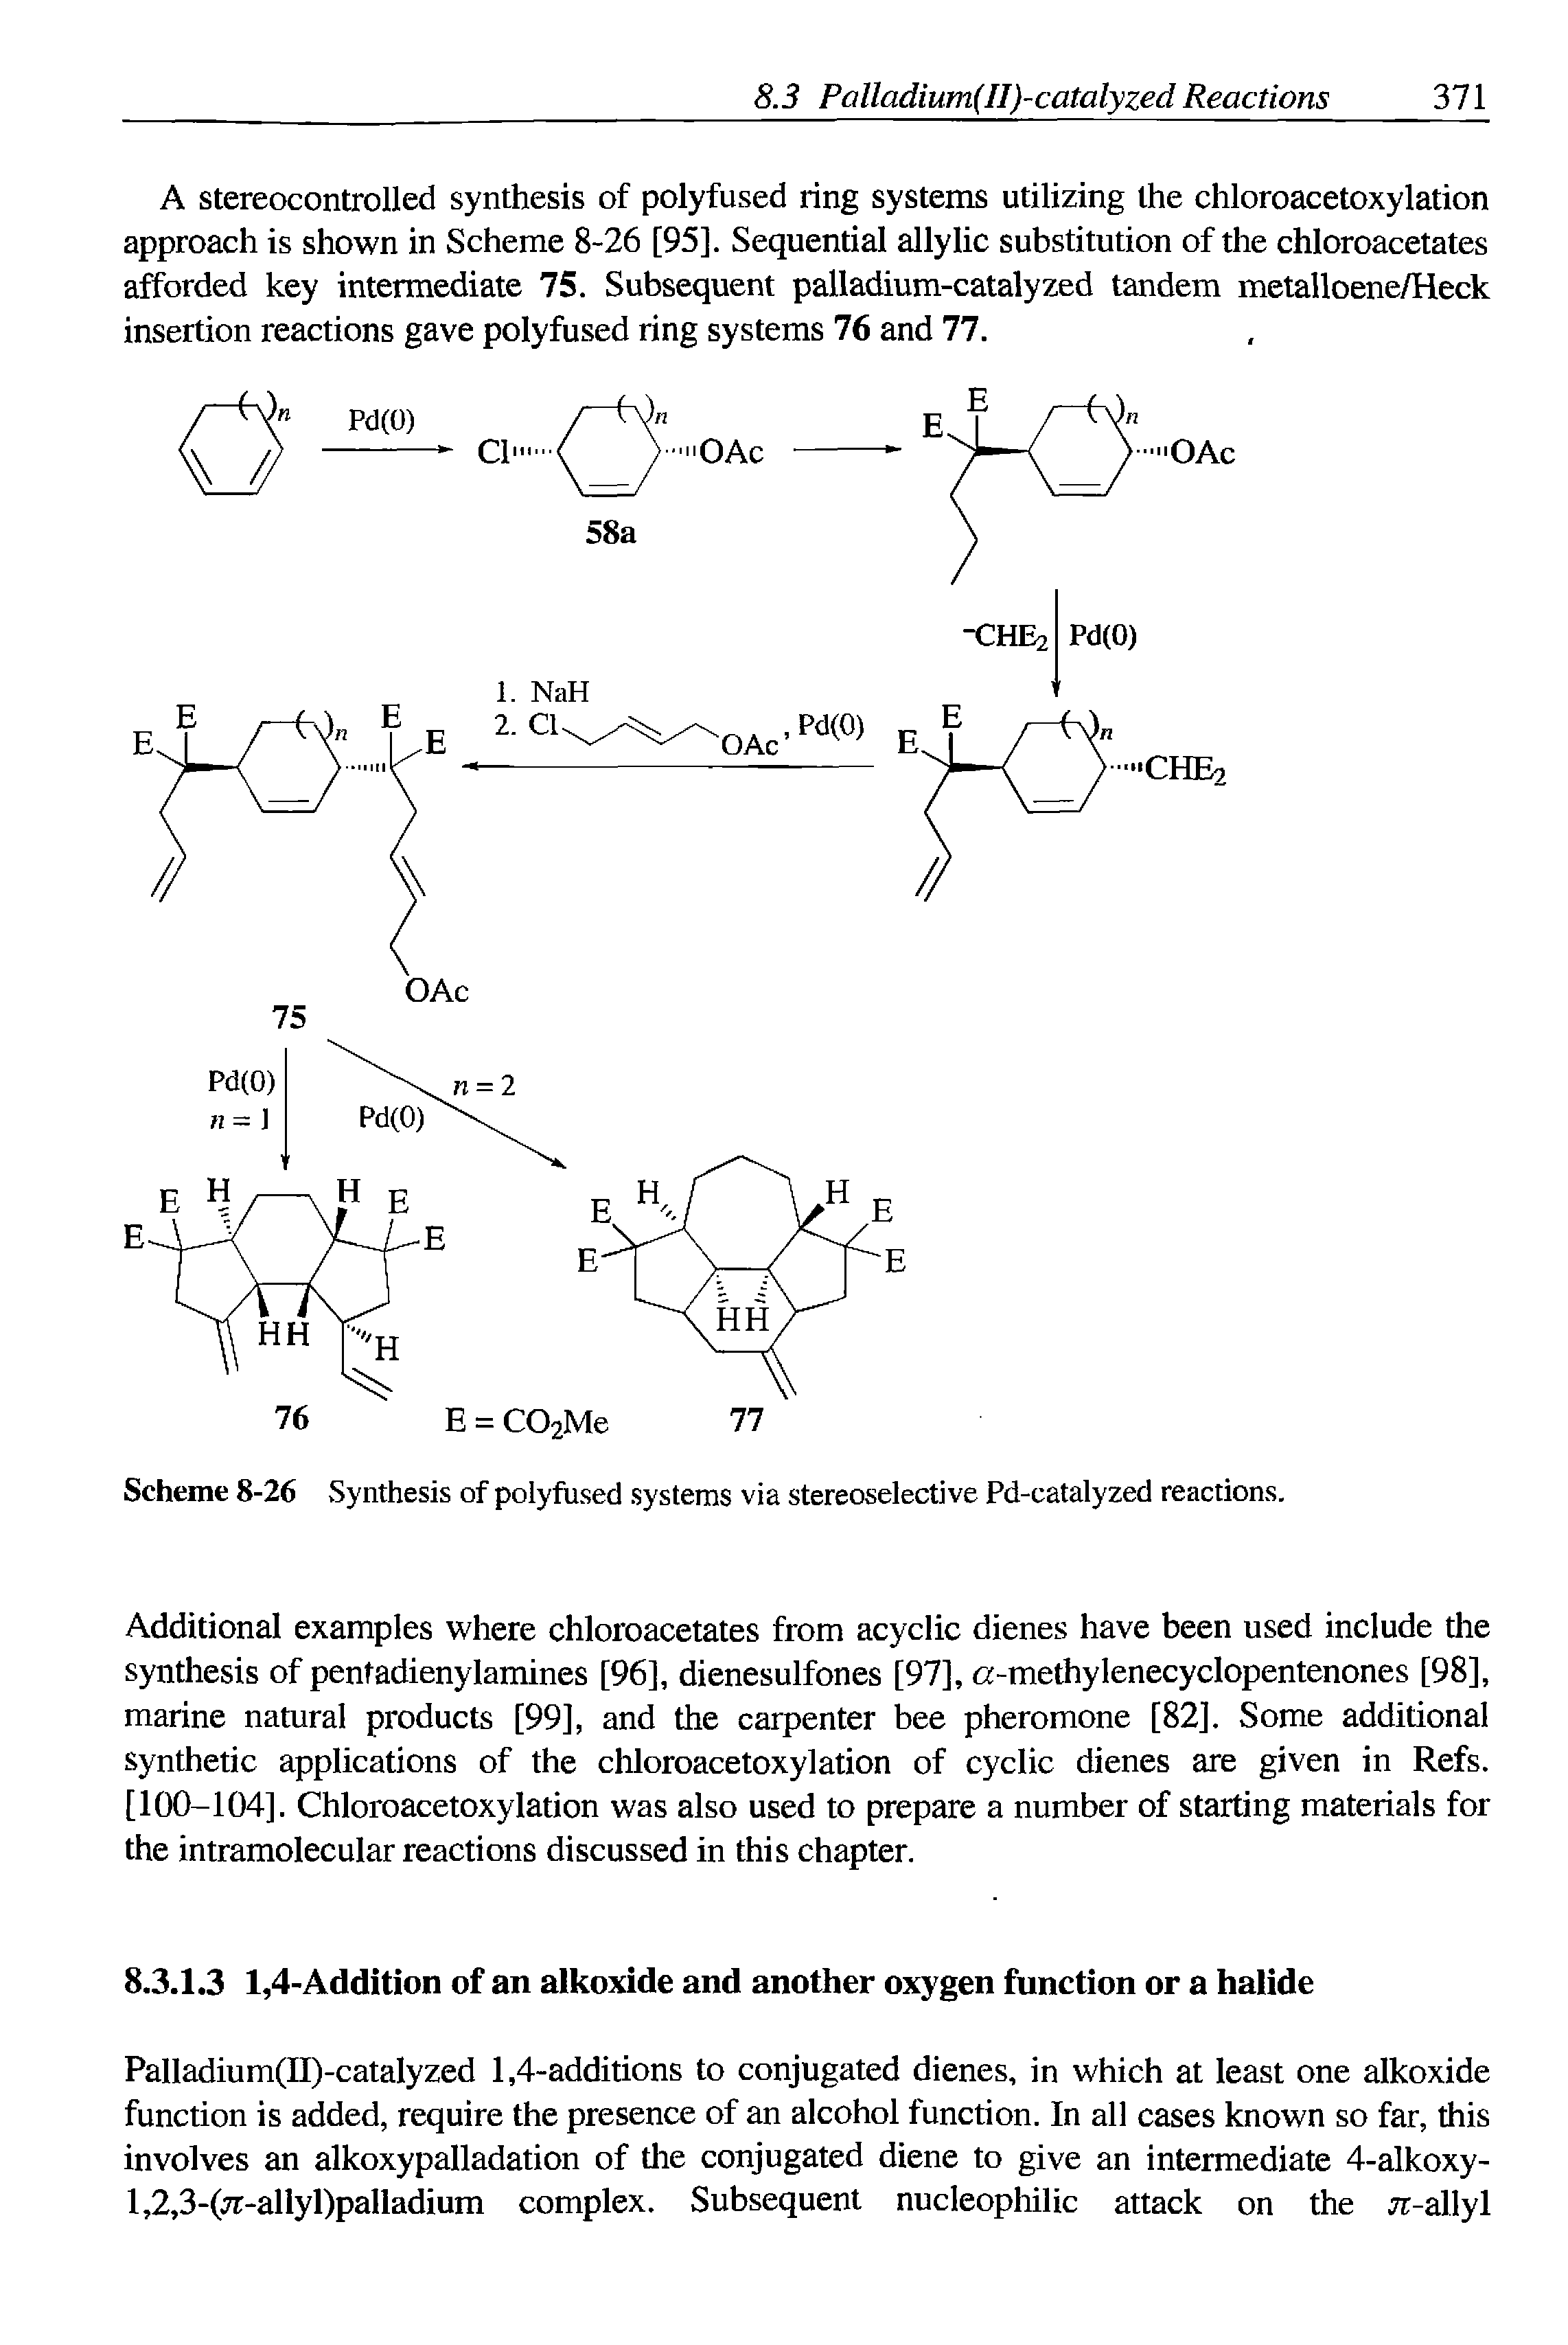 Scheme 8-26 Synthesis of polyfused. systems via stereoselective Pd-catalyzed reactions.